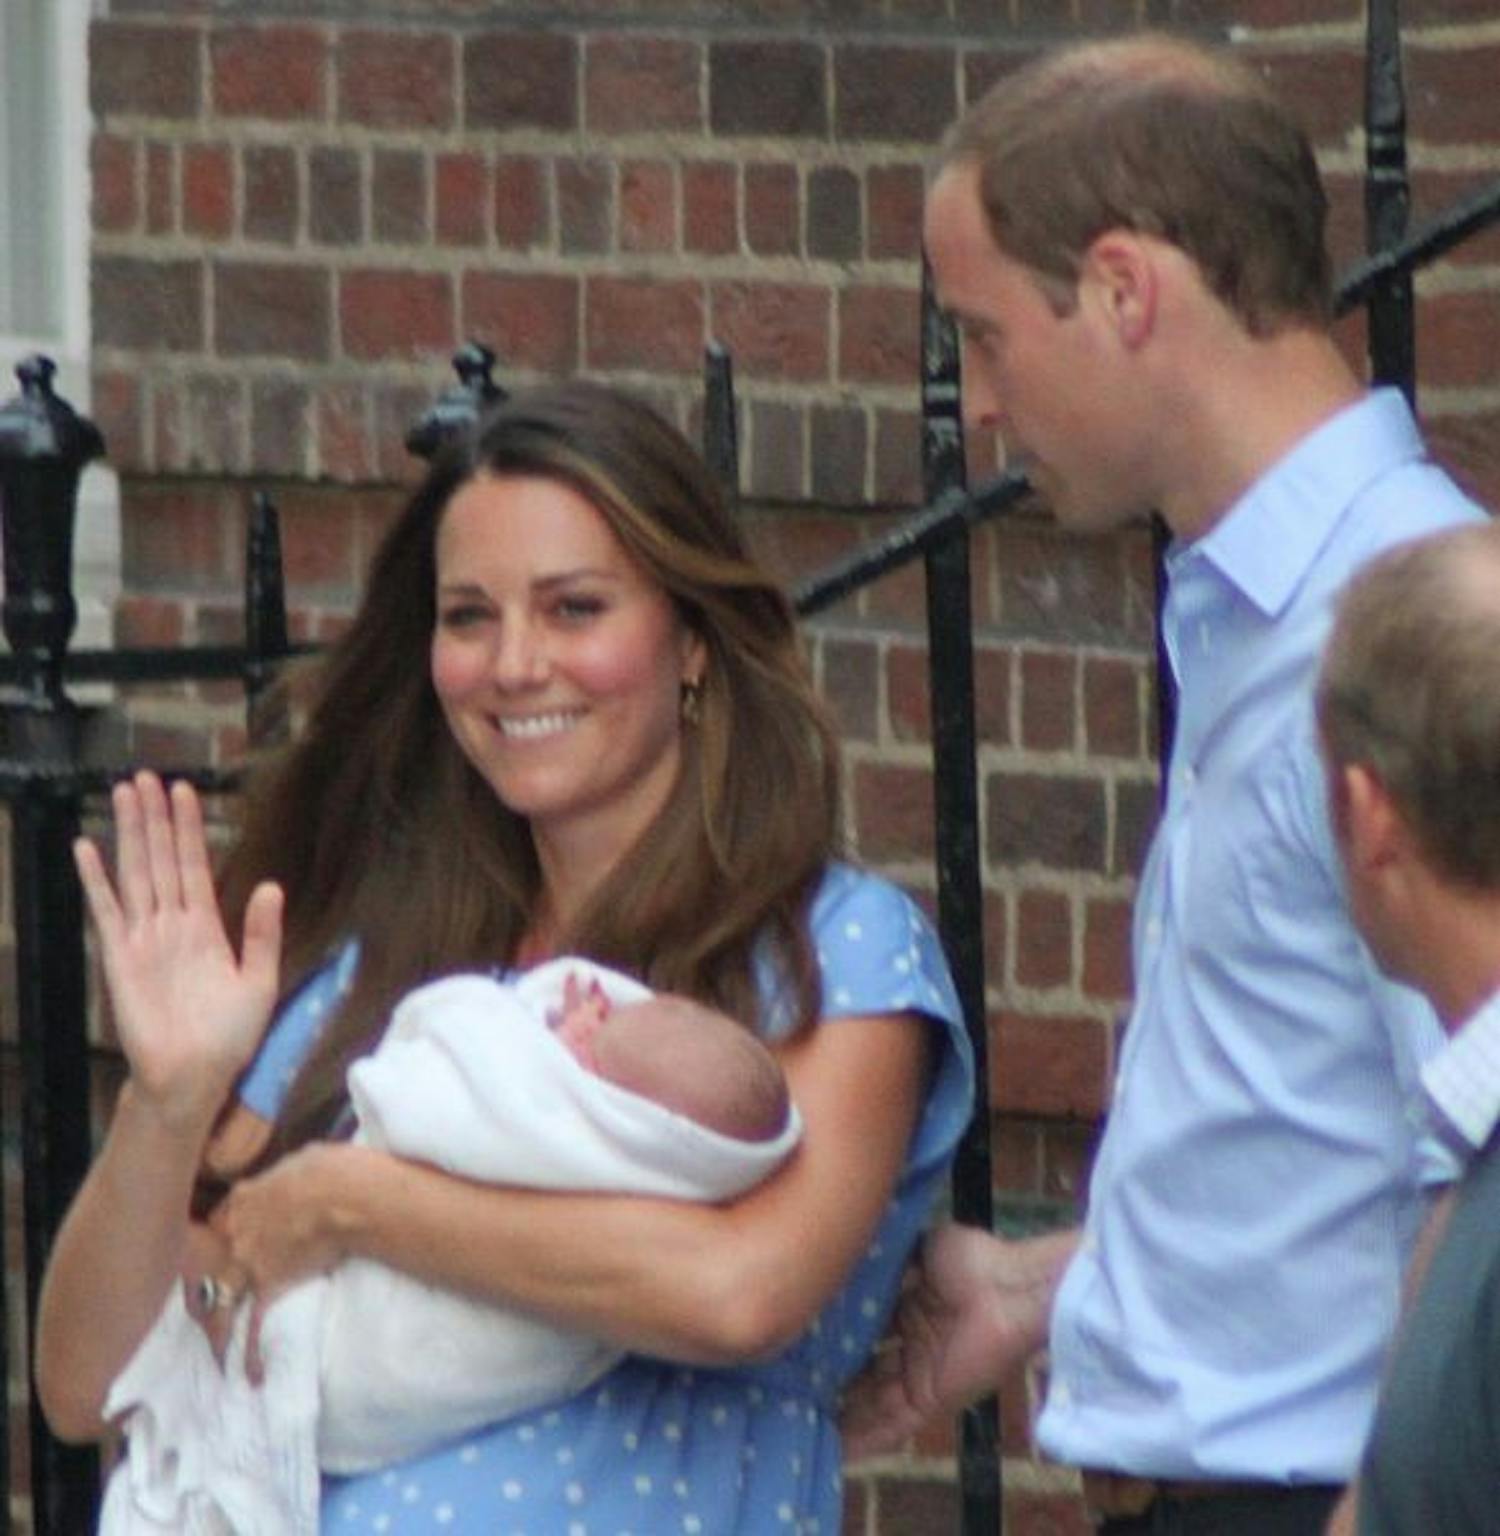 The_Duke_and_Duchess_of_Cambridge_with_Prince_George-crop.jpg